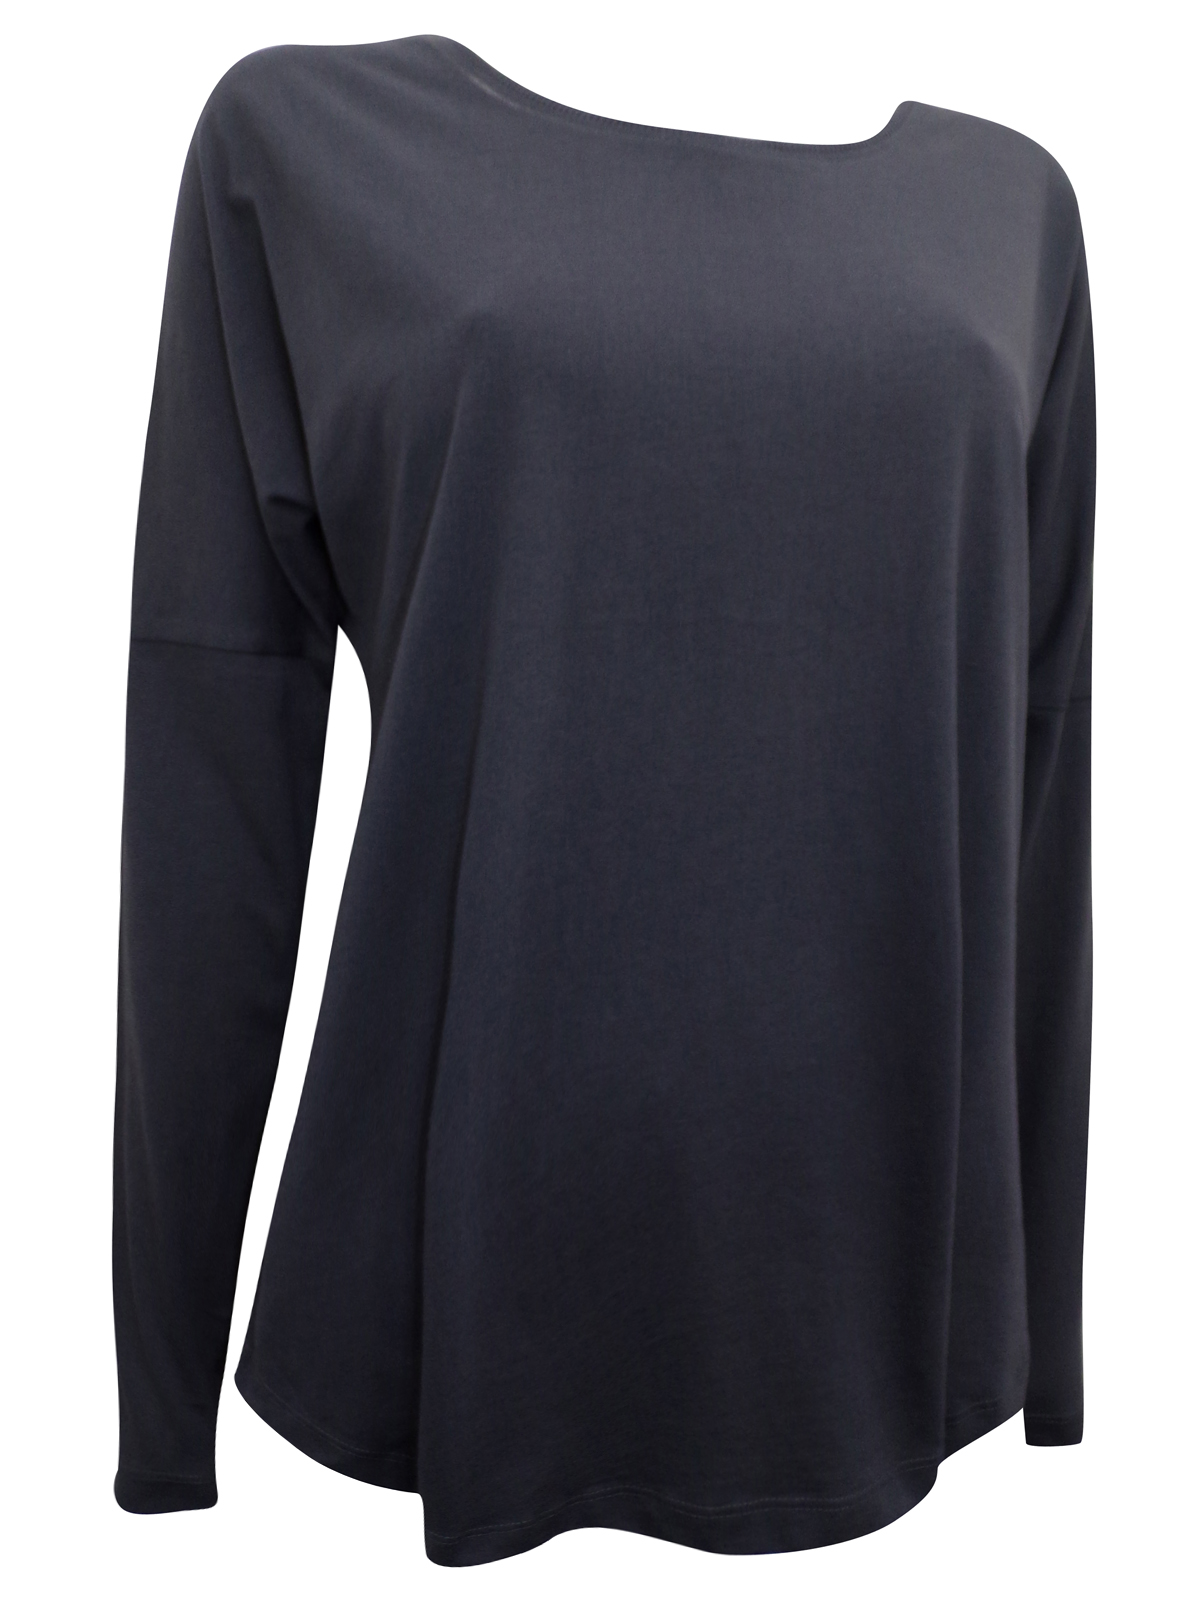 Cloth & Co - - Cloth&Co INK Organic Cotton Long Sleeve Top - Size 10 to ...